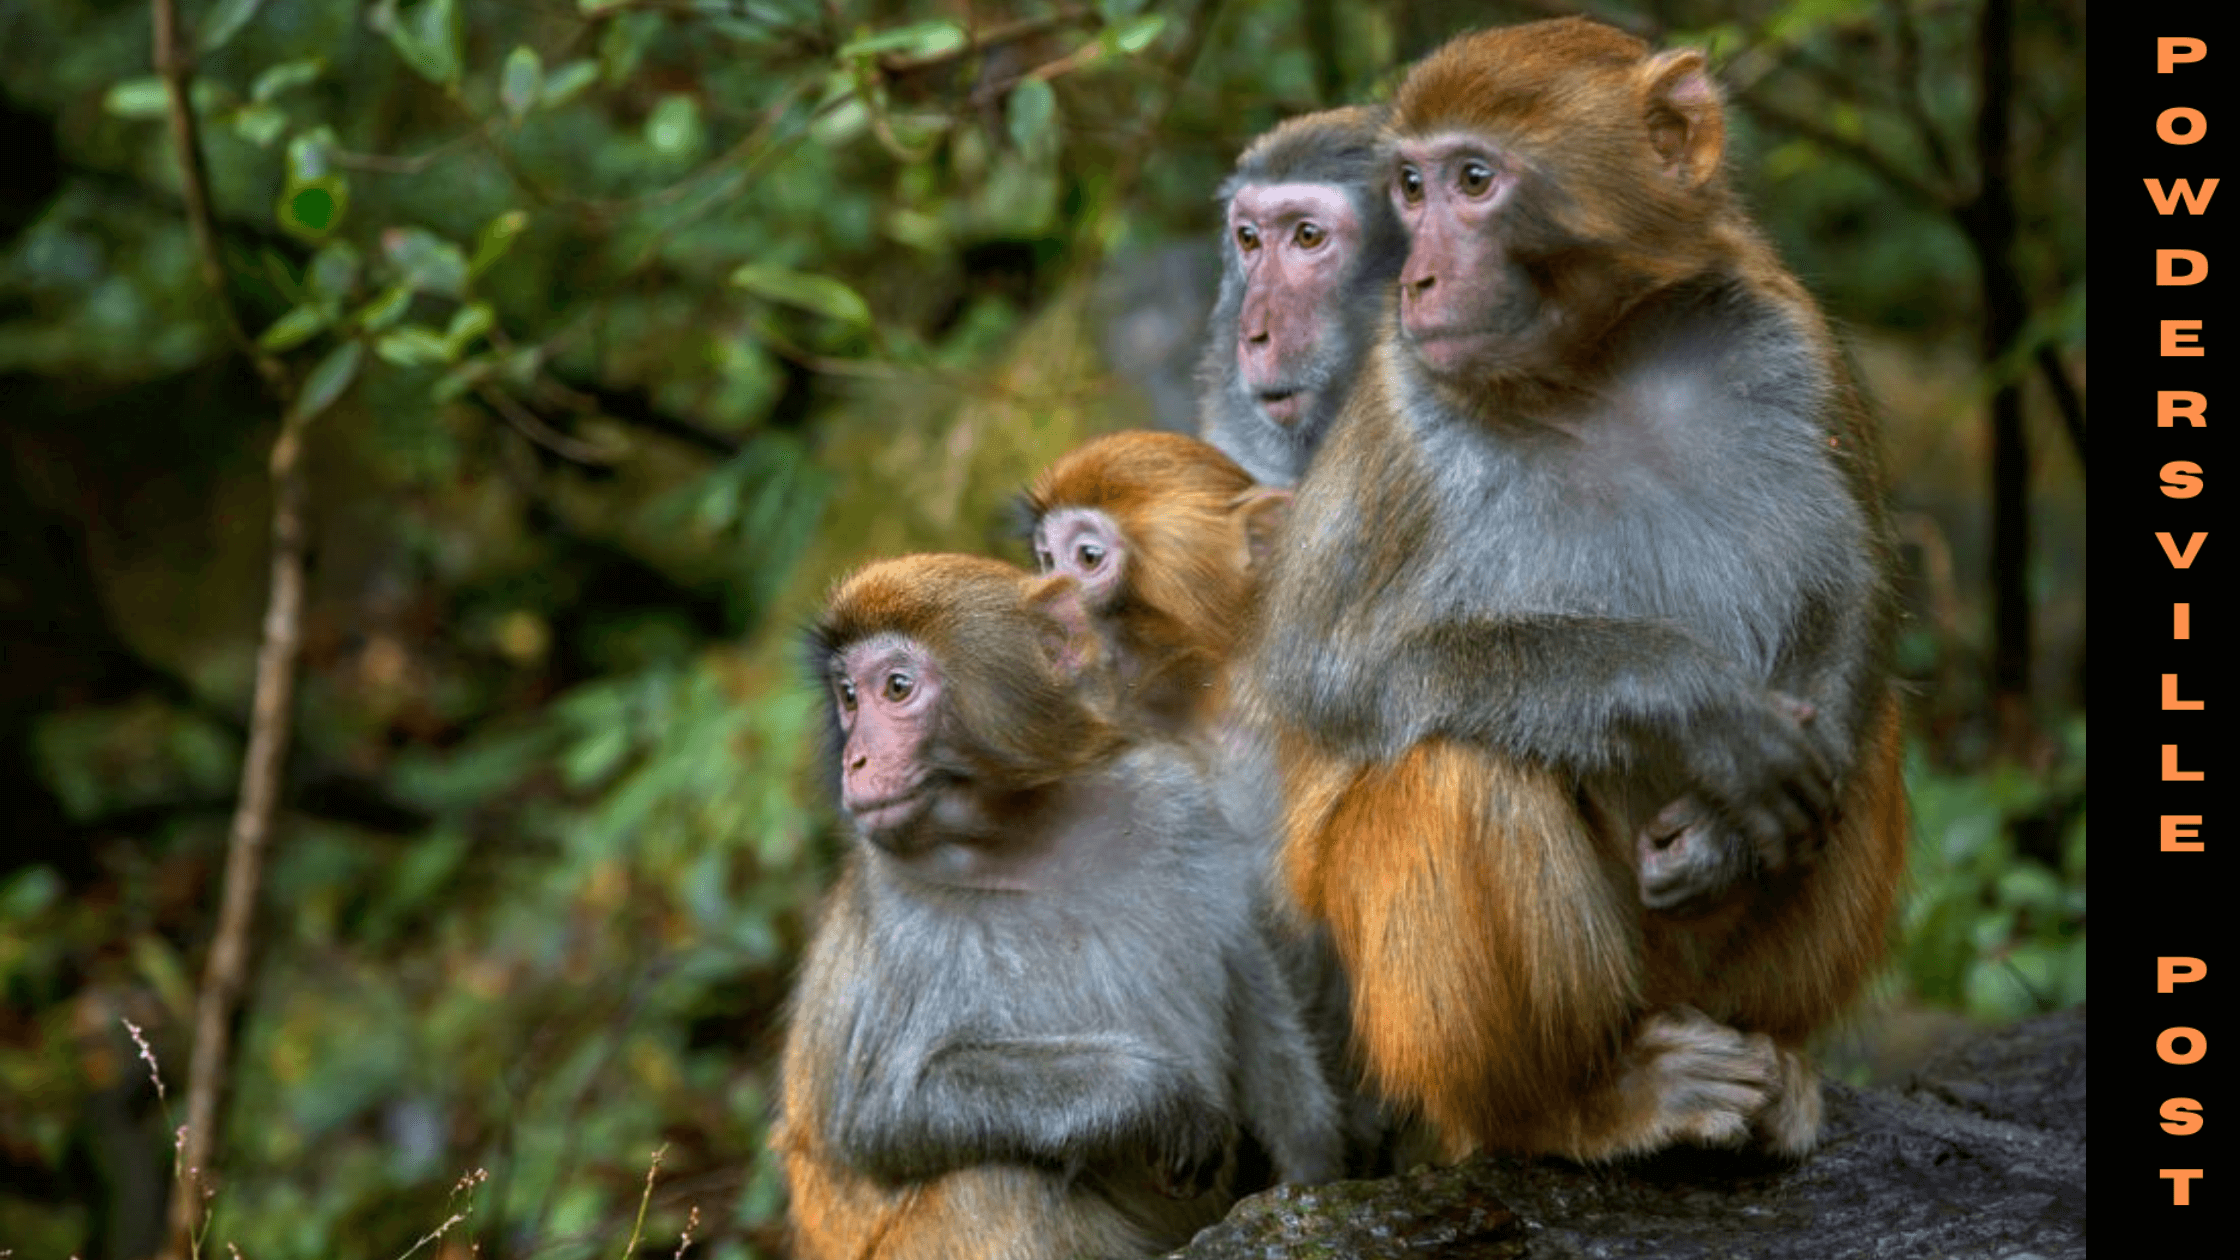 Everything To Know About The Sufferance Of The Monkeys